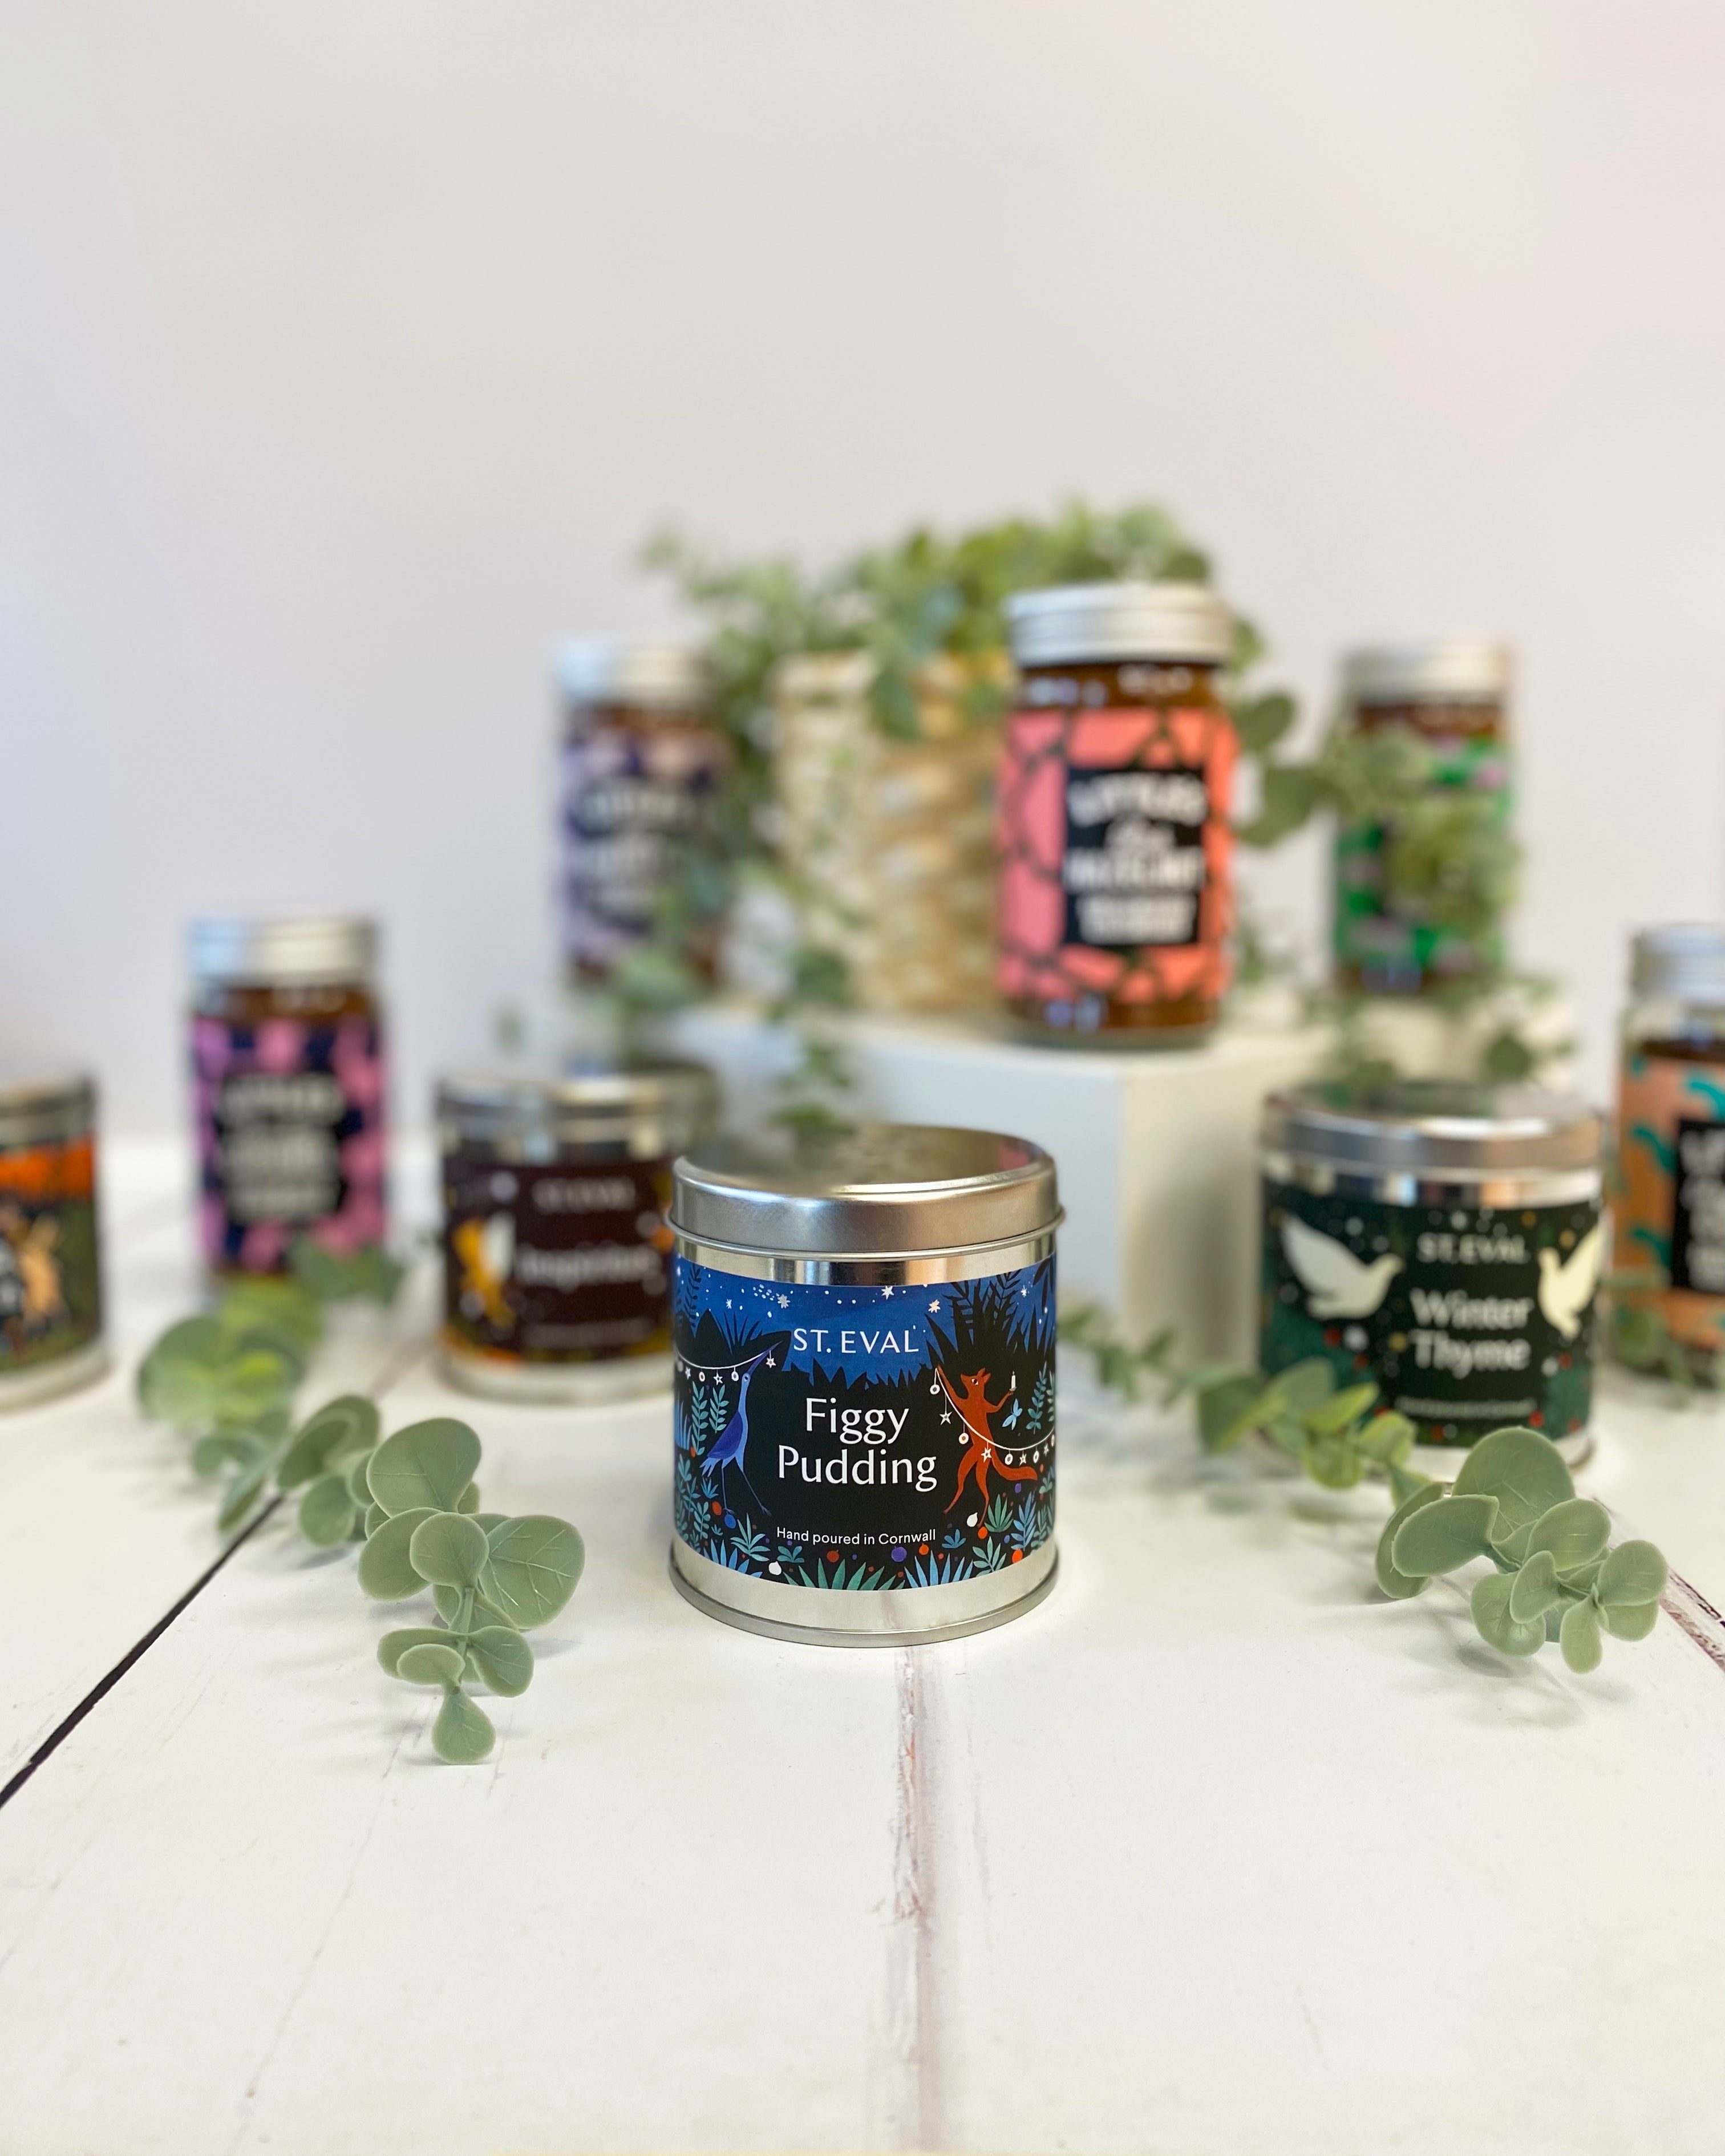 Win flavoured coffee & St Eval Christmas candles